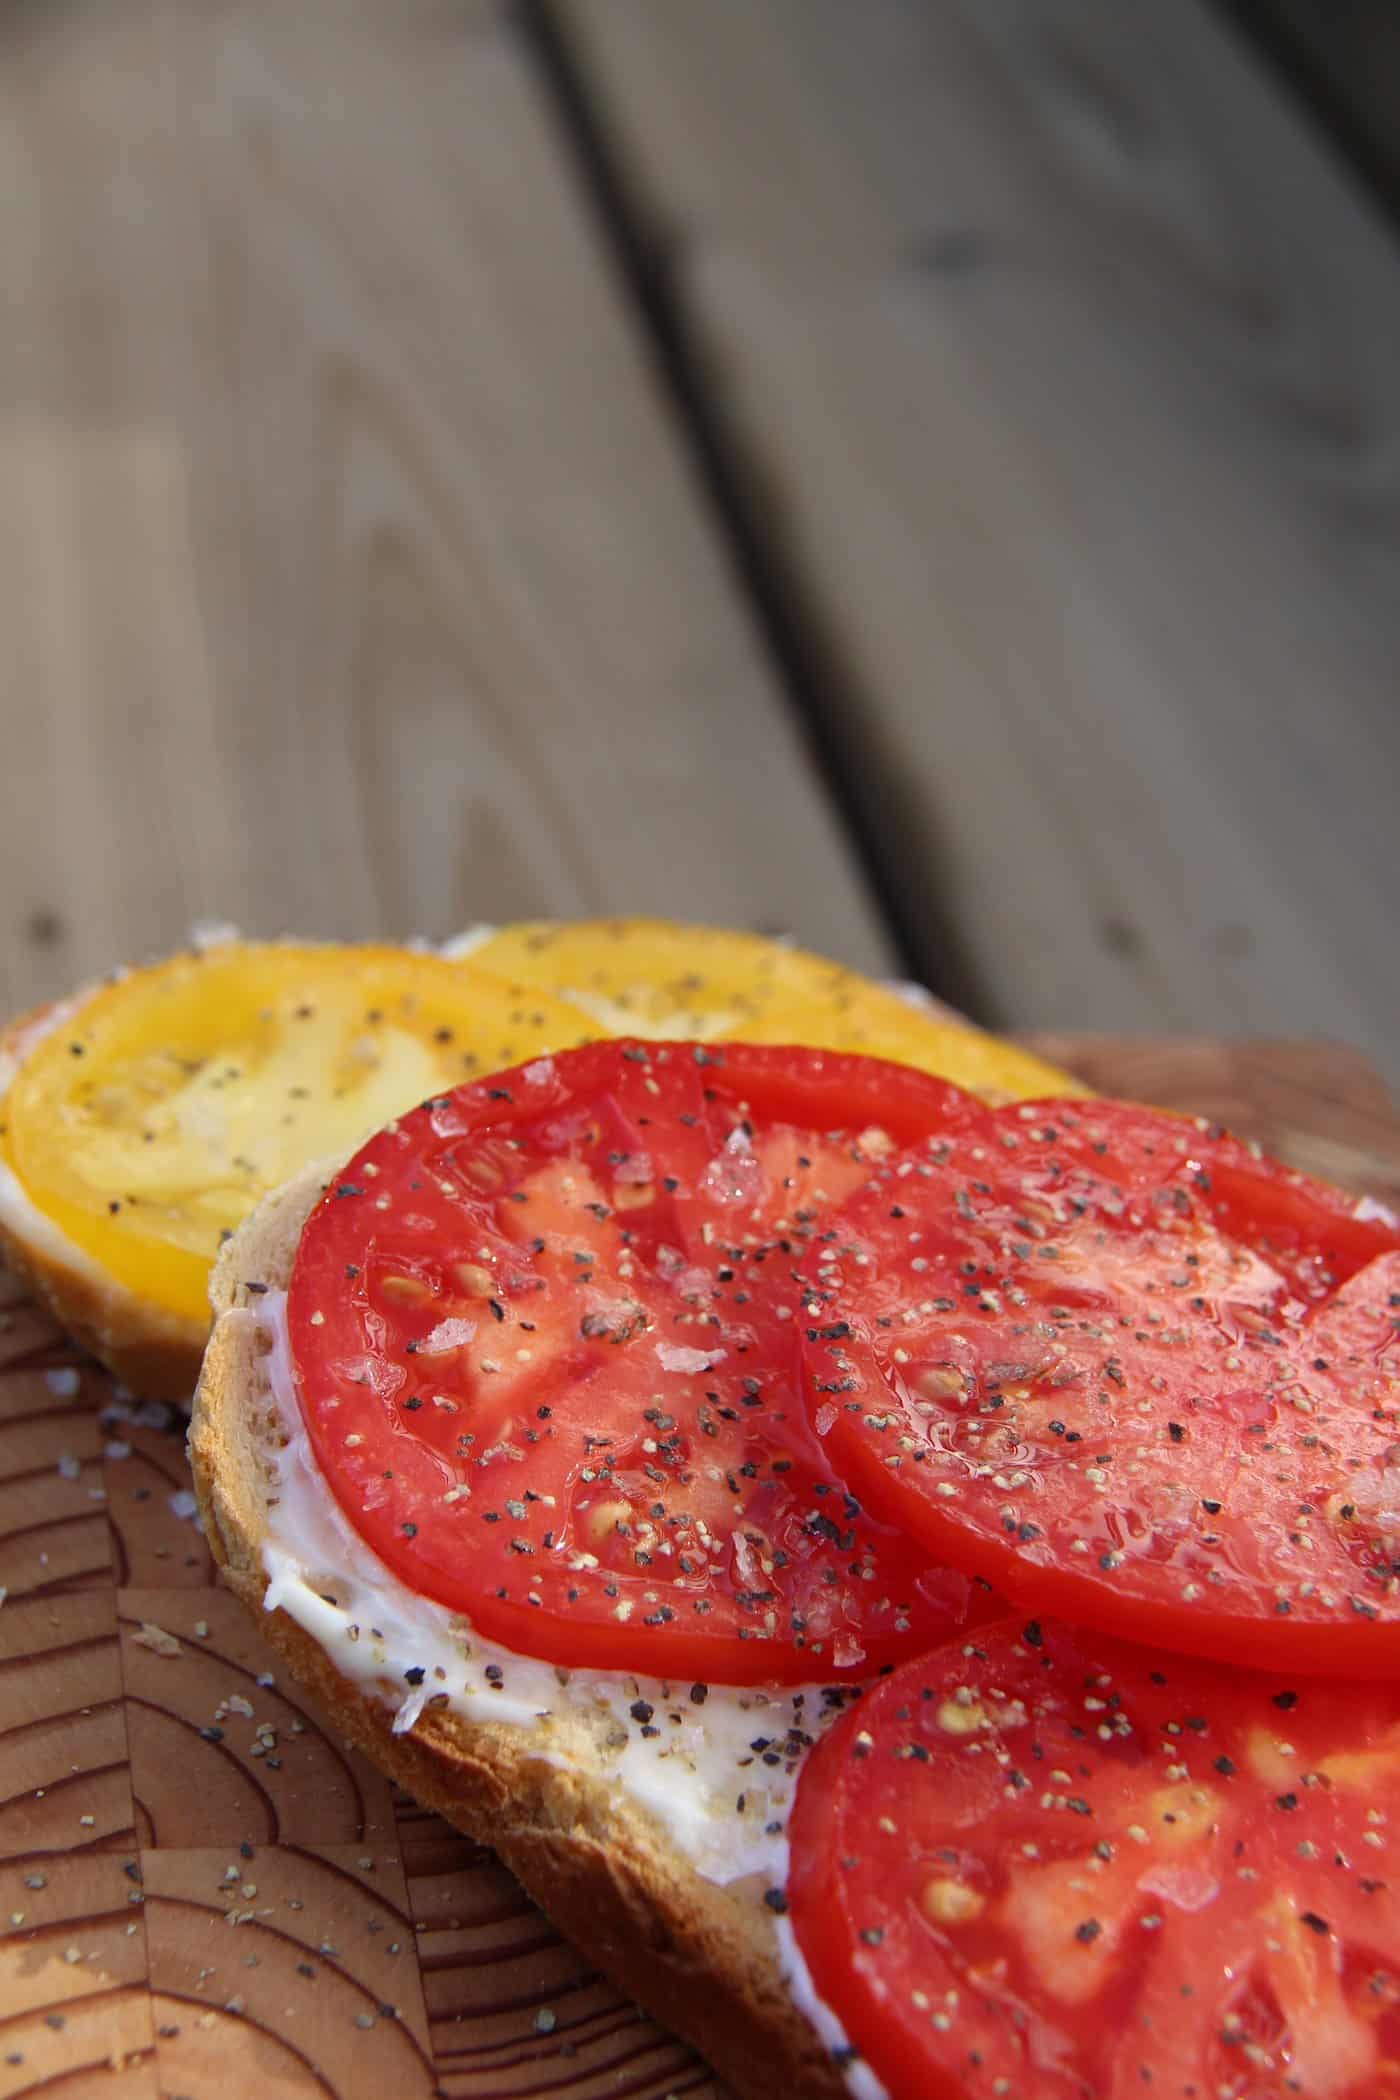 Tomatoes on toast are so yummy if you've got fresh heirloom tomatoes! Tomato toast is my all-time favourite summer snack. It's the perfect garden-to-table meal during harvest season! | home for the harvest #heirloomtomatoes #heirloomtomato #tomatotoast #tomatoesontoast #gardentotable #homefortheharvest